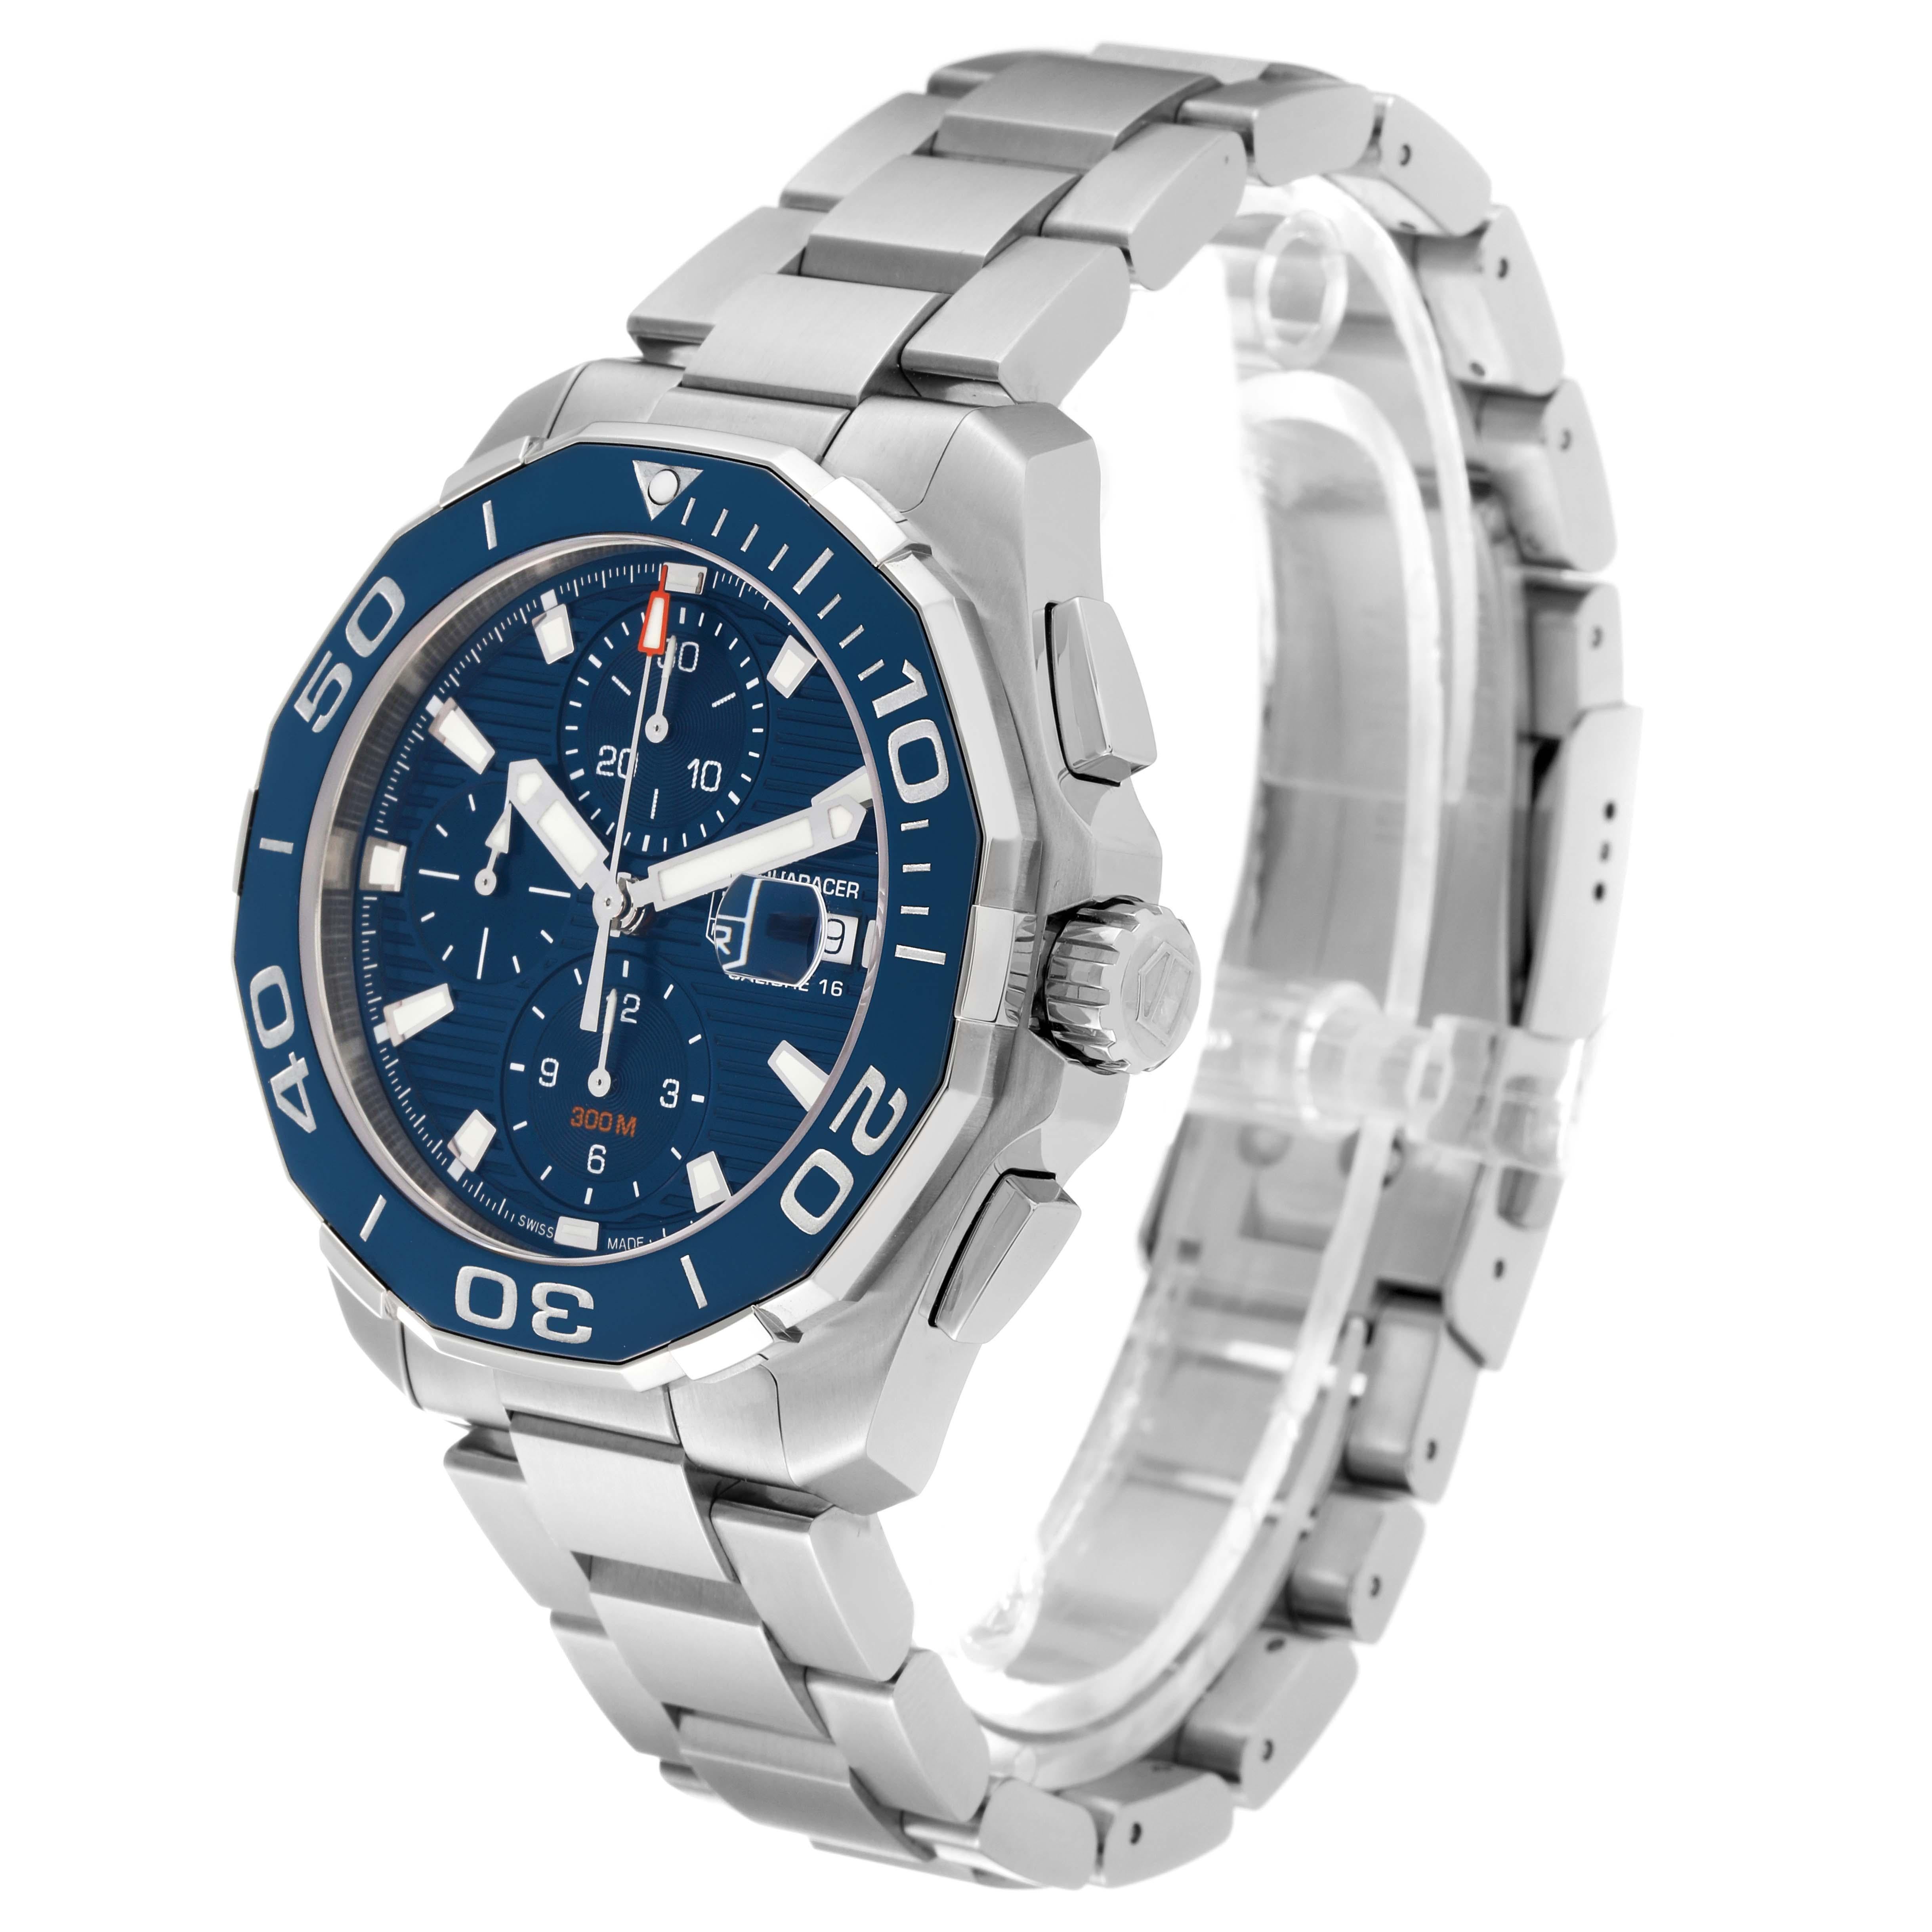 Tag Heuer Aquaracer Blue Dial Steel Chronograph Mens Watch CAY211B Box Card For Sale 6